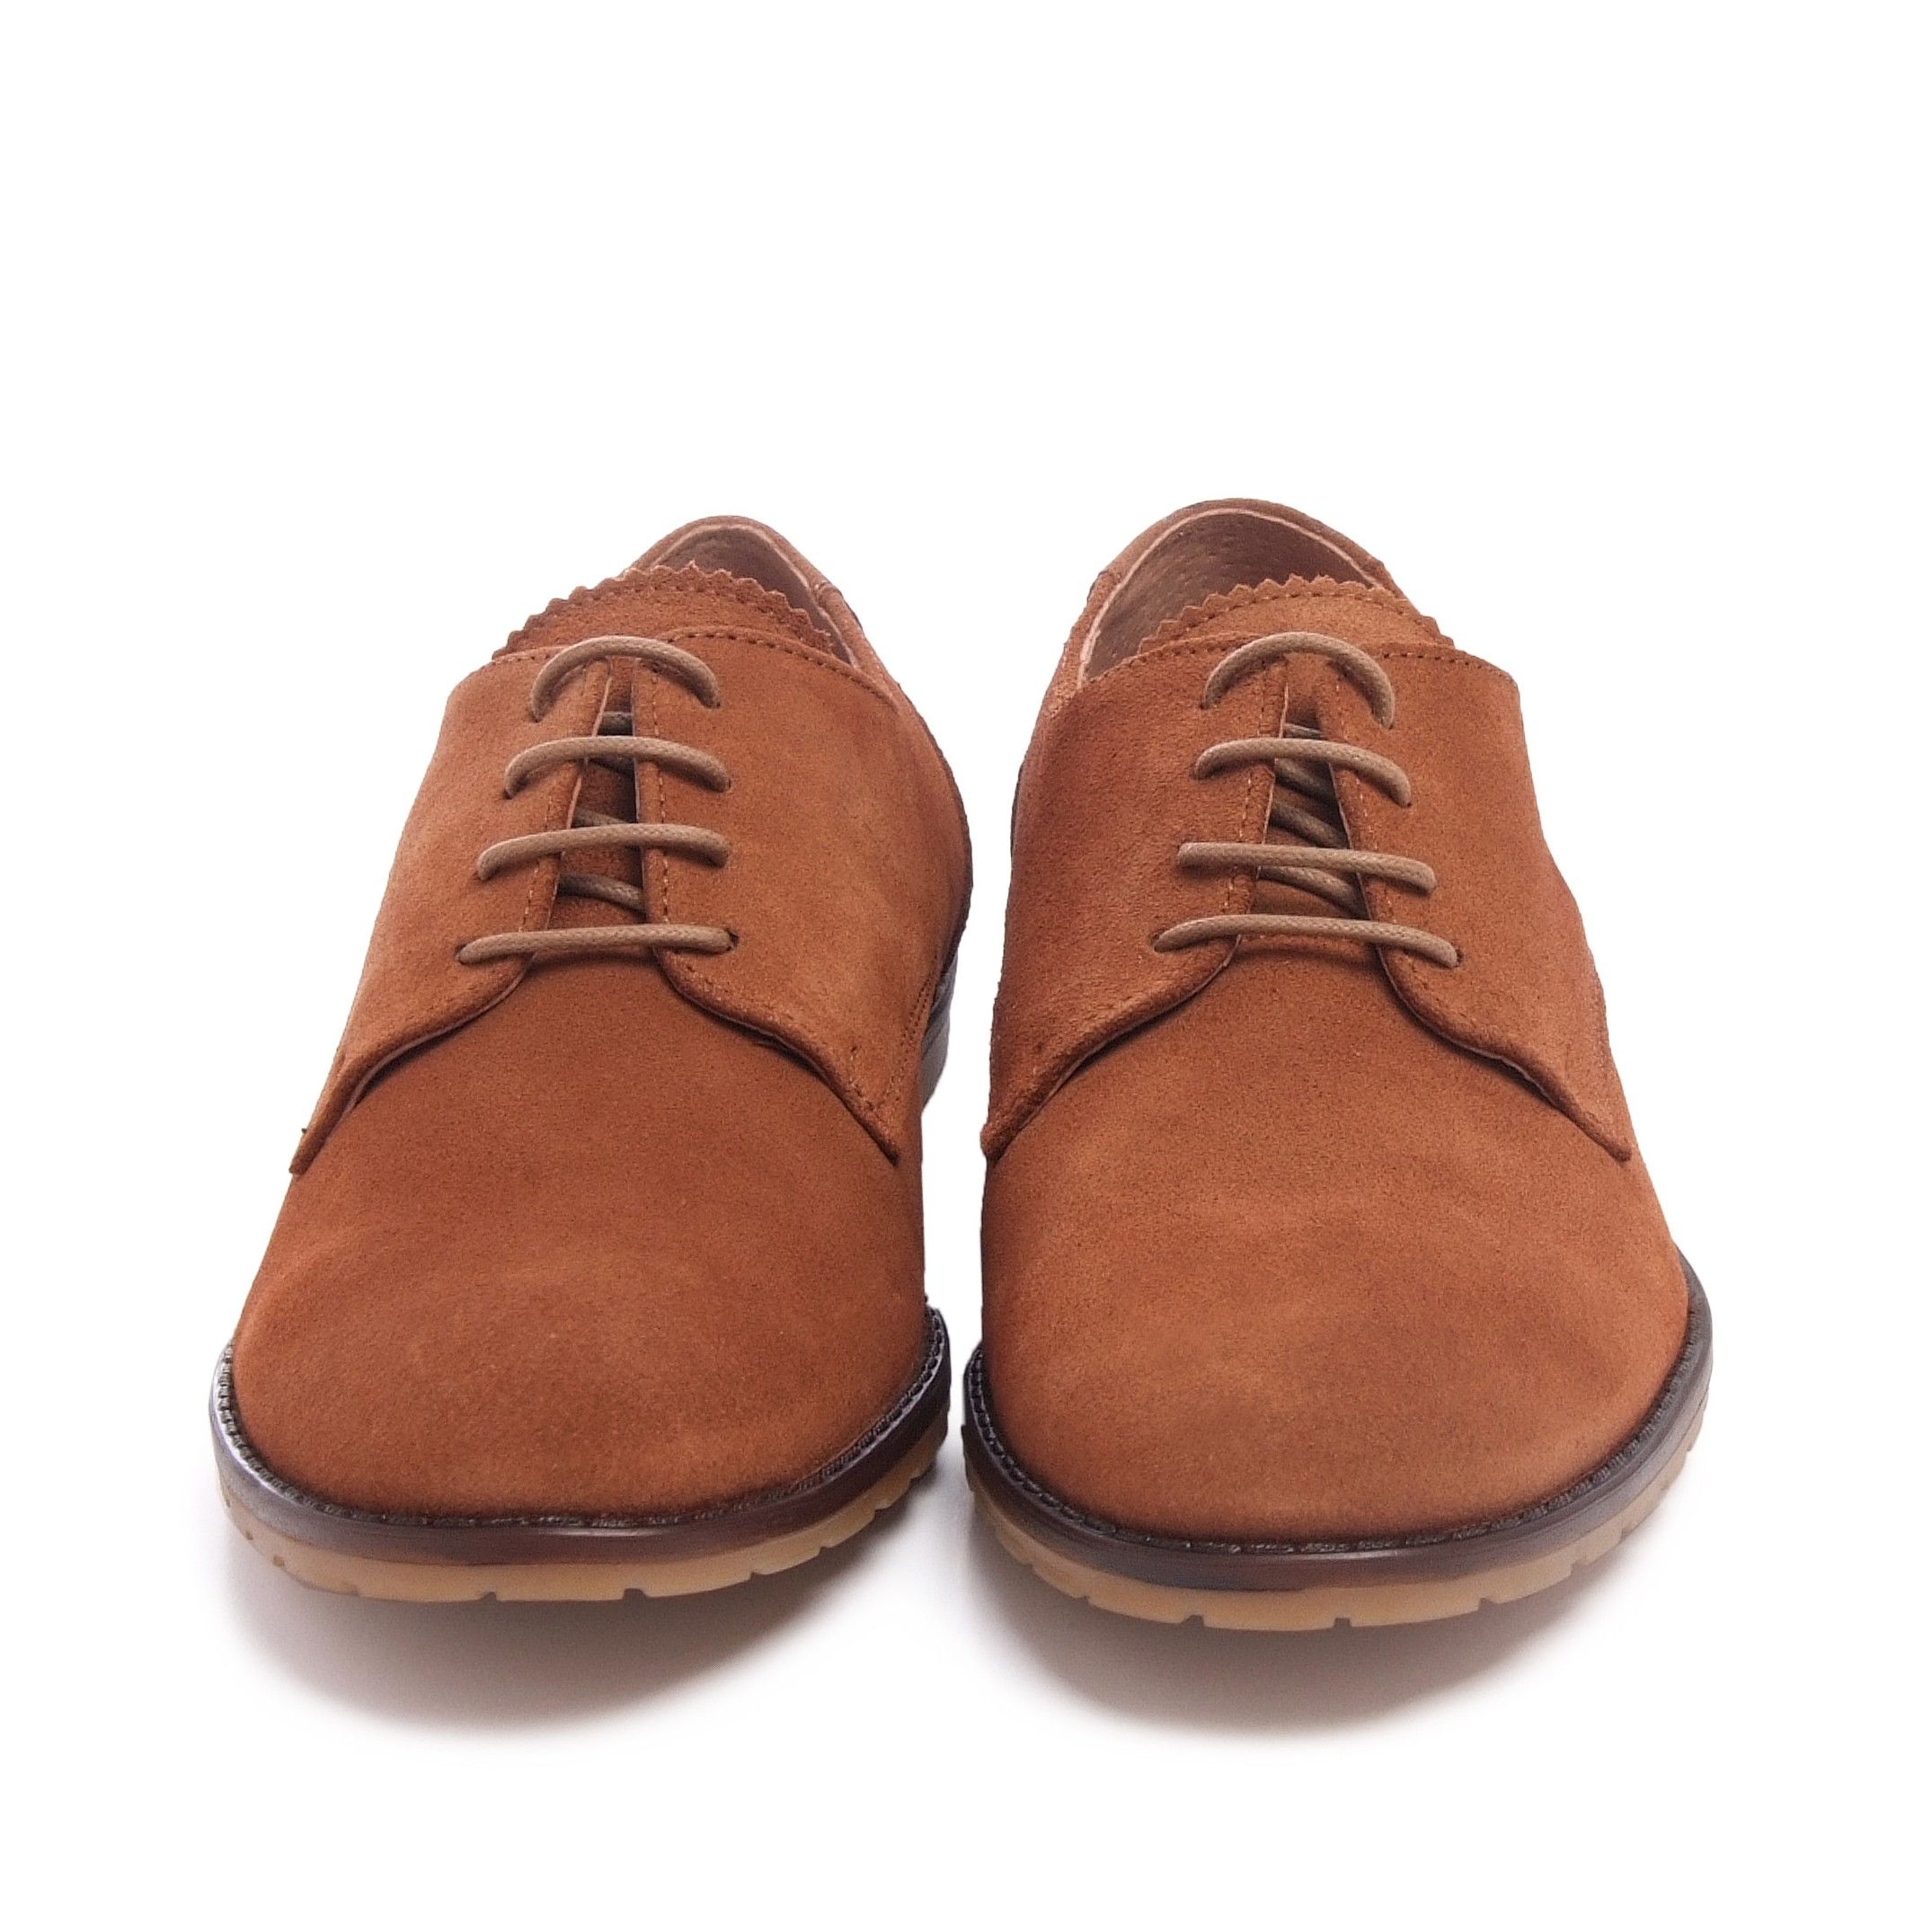 Lace up Blucher . Closure: laces. Upper: leather. Inner and insole made of natural leather. Sole: Non-skid rubber. MADE IN SPAIN.